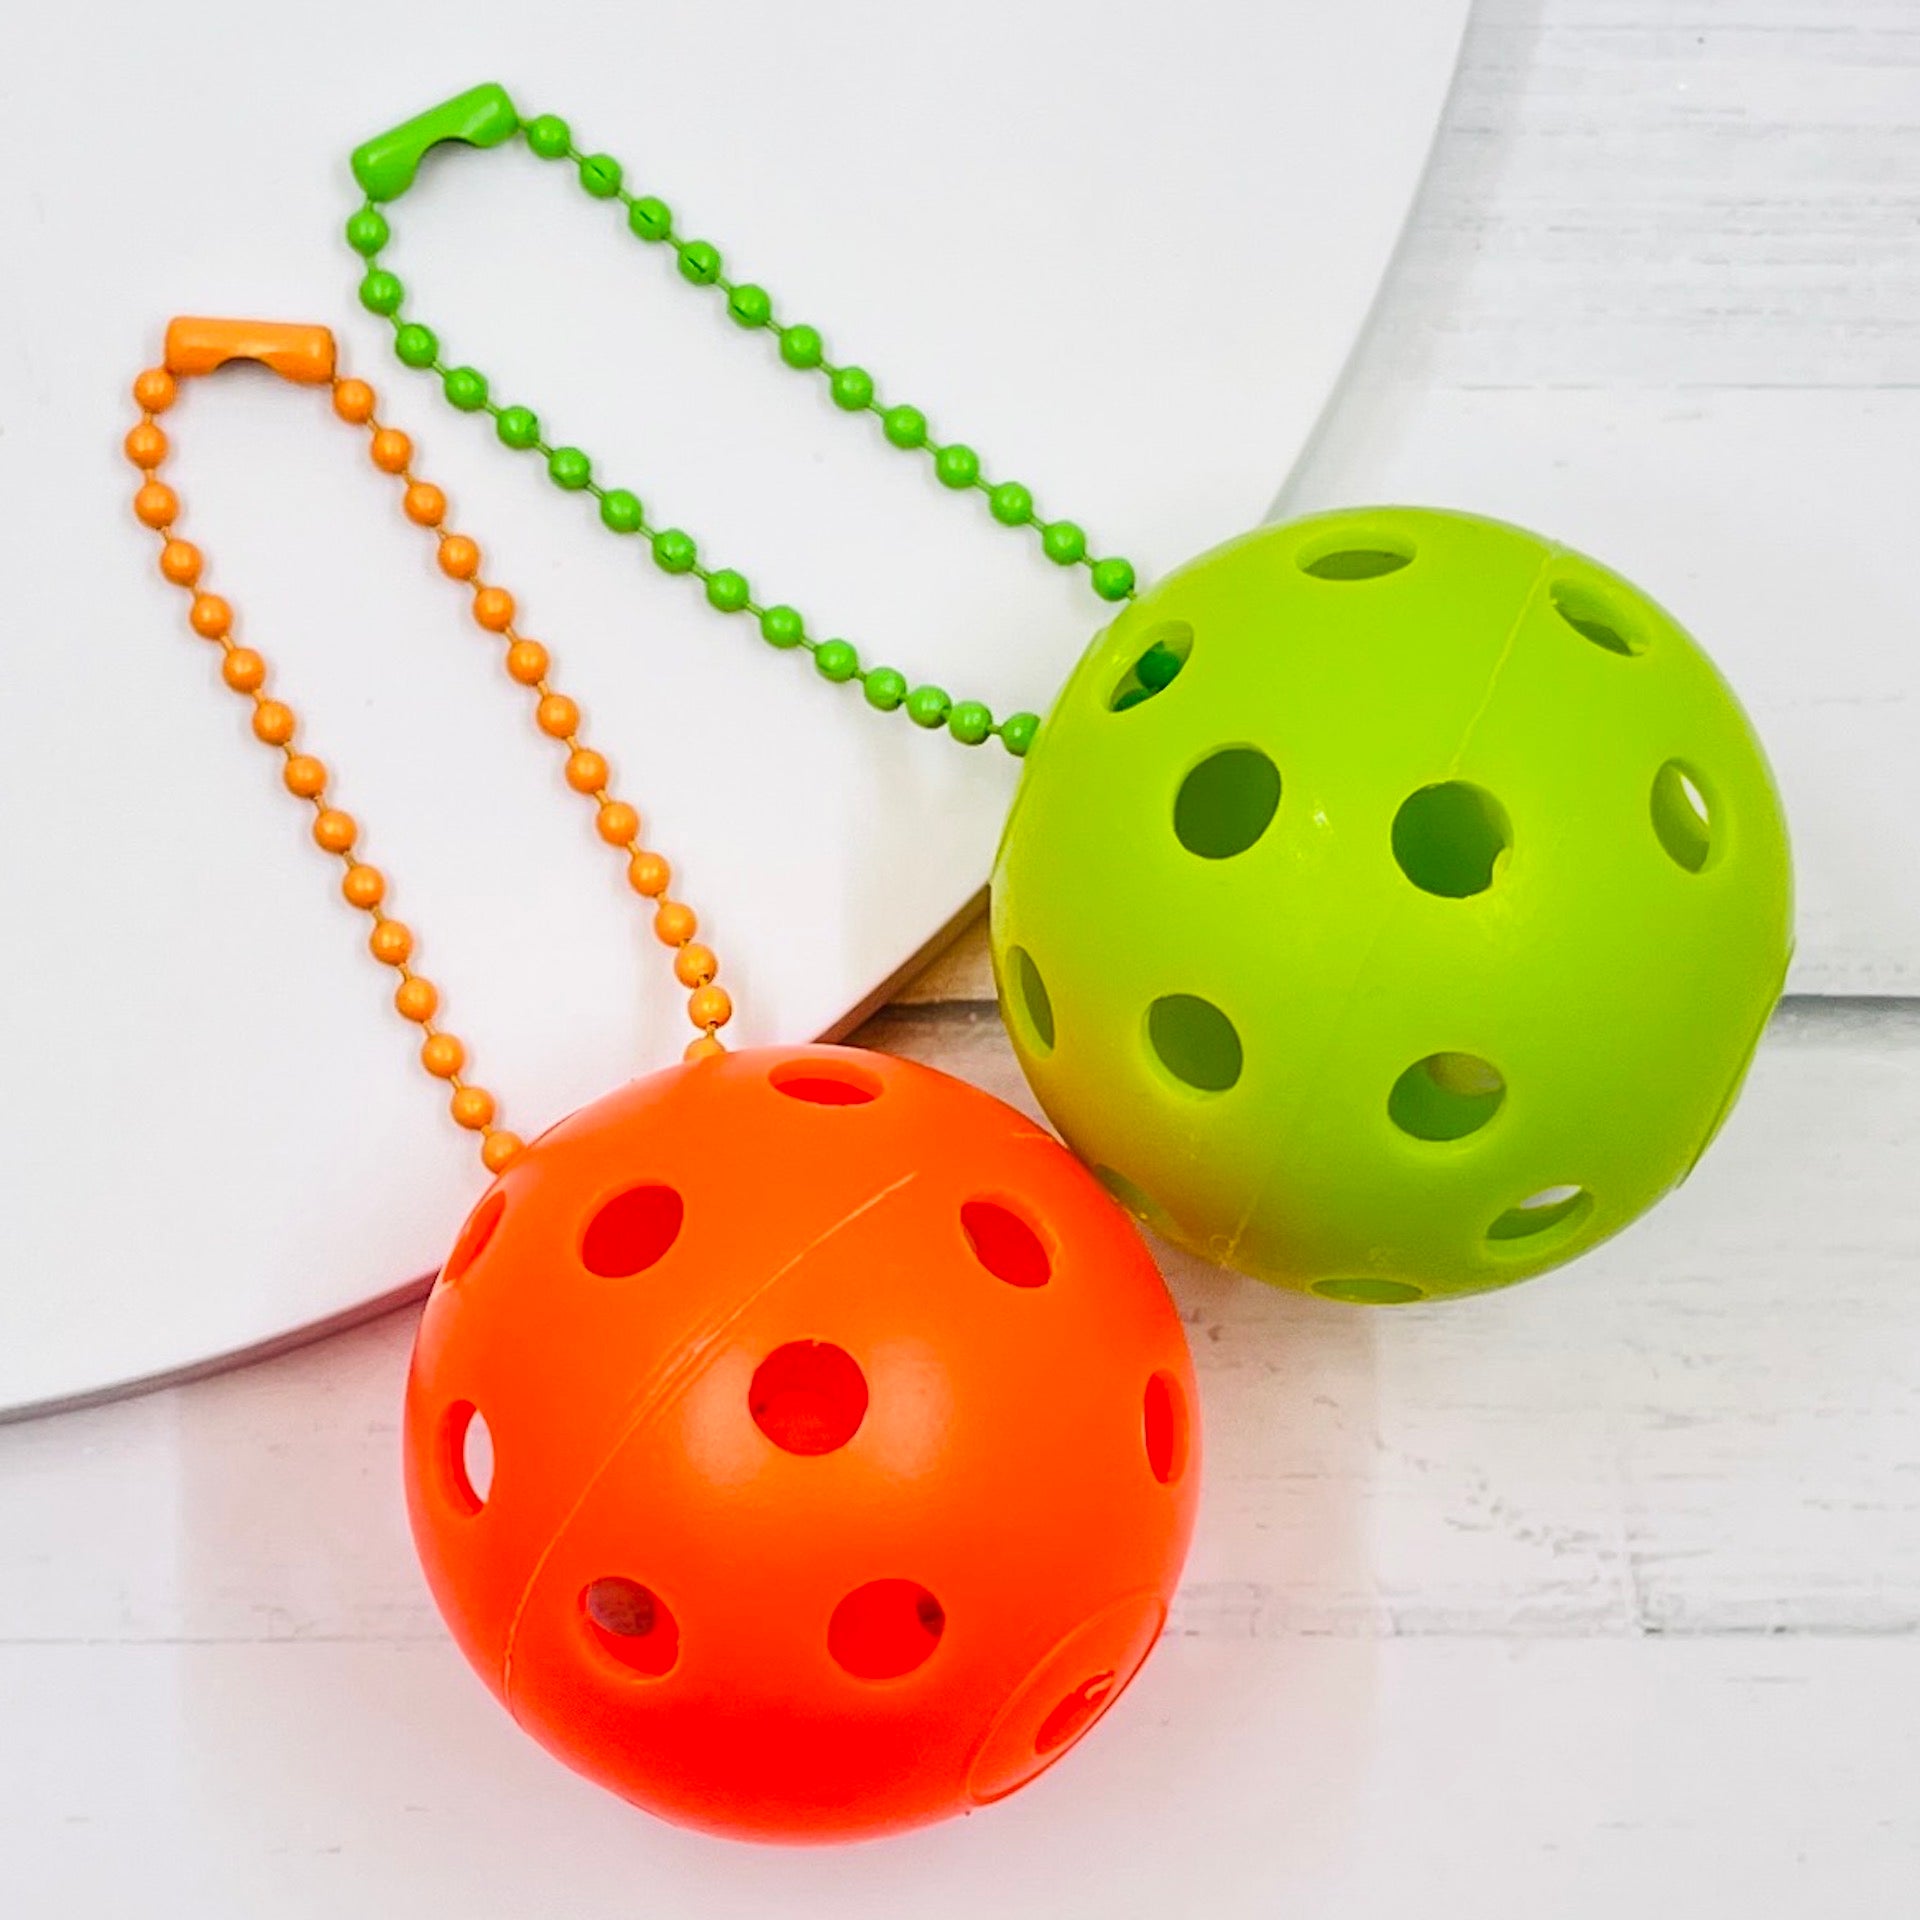 Mini Pickleball Bag Tags/Pulls (Set of 2)  Each order gets you 2 of the little mini pickleballs and chain! They measure about 1 1/2 inches and are used as bag tag markers. Fun for any bag, especially your pickleball bag!! The balls come in 7 colors: Red, Green, Blue, Orange, White, Pink, and Yellow. Choose 2 of the 7 fun colors.